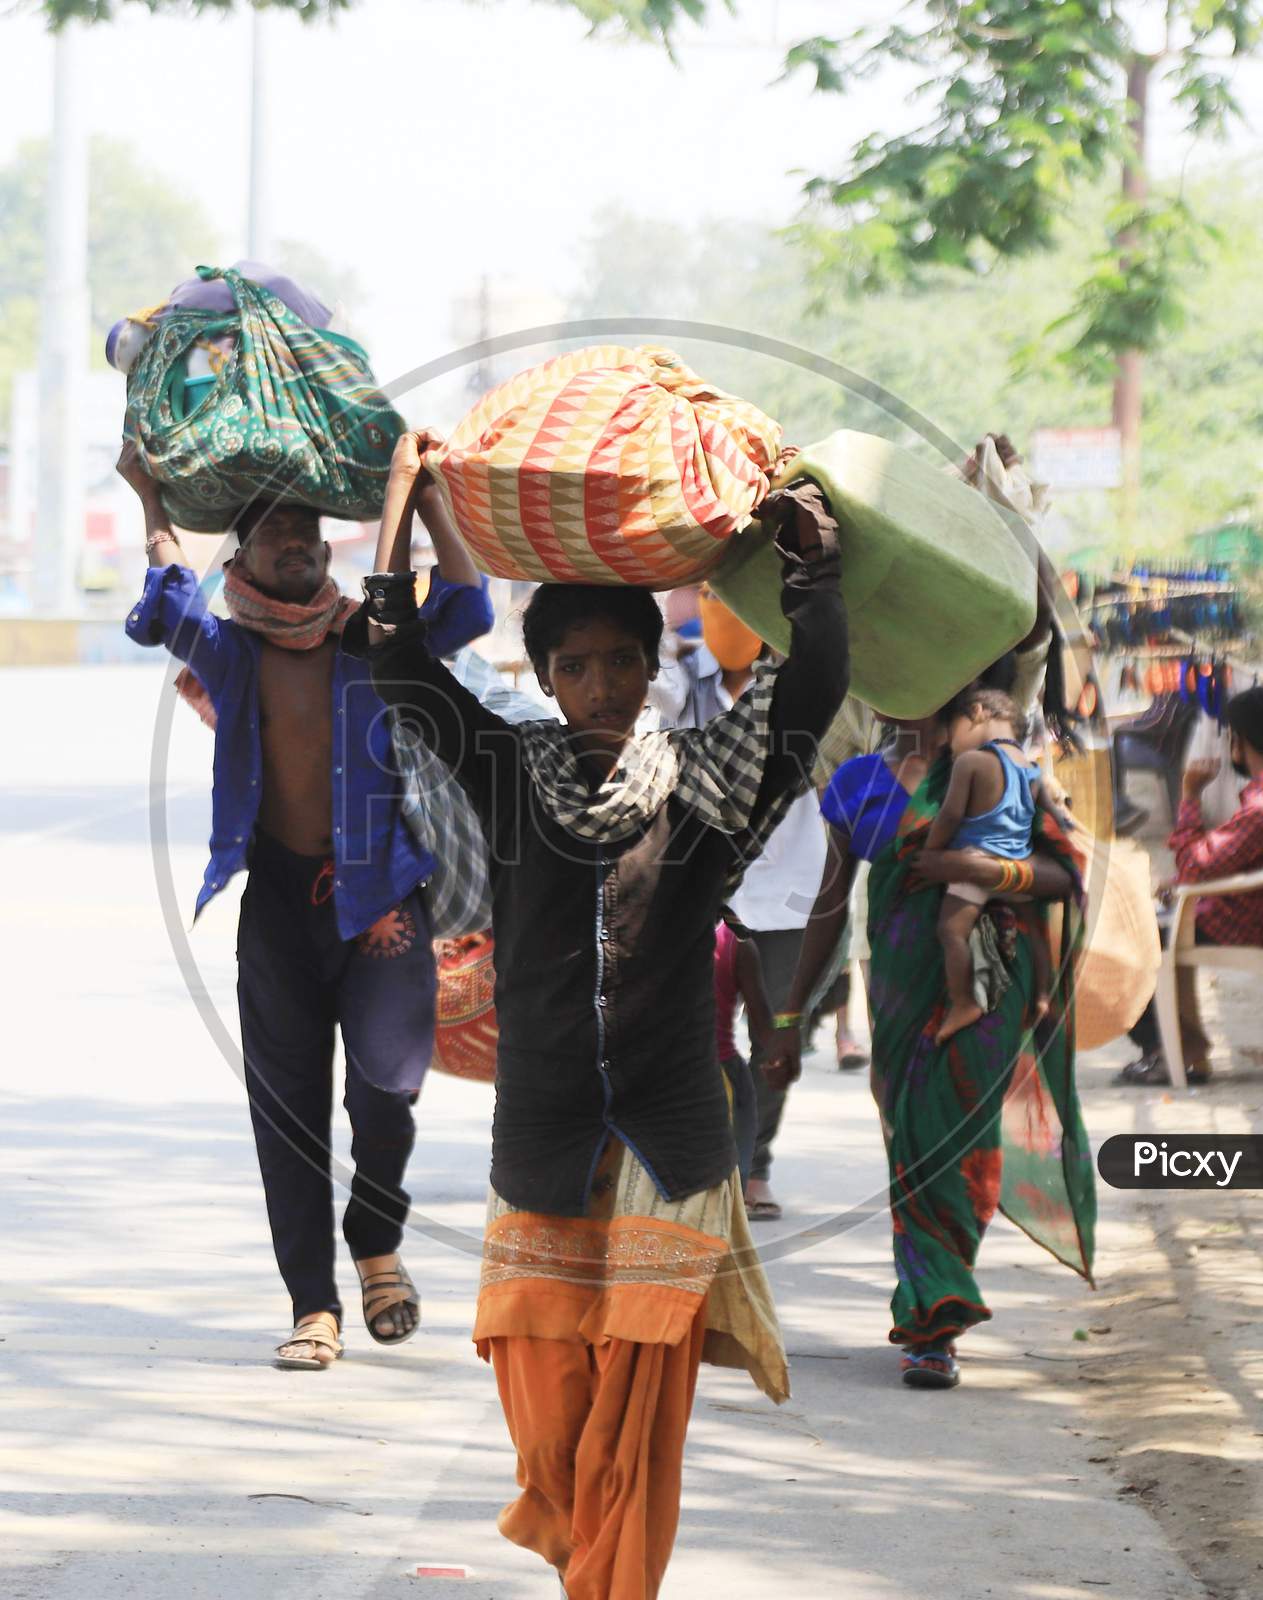 Migrant labourers carry goods as the walk on the road during an extended nationwide lockdown to slow the spread of the coronavirus disease, in Prayagraj, May 4, 2020.